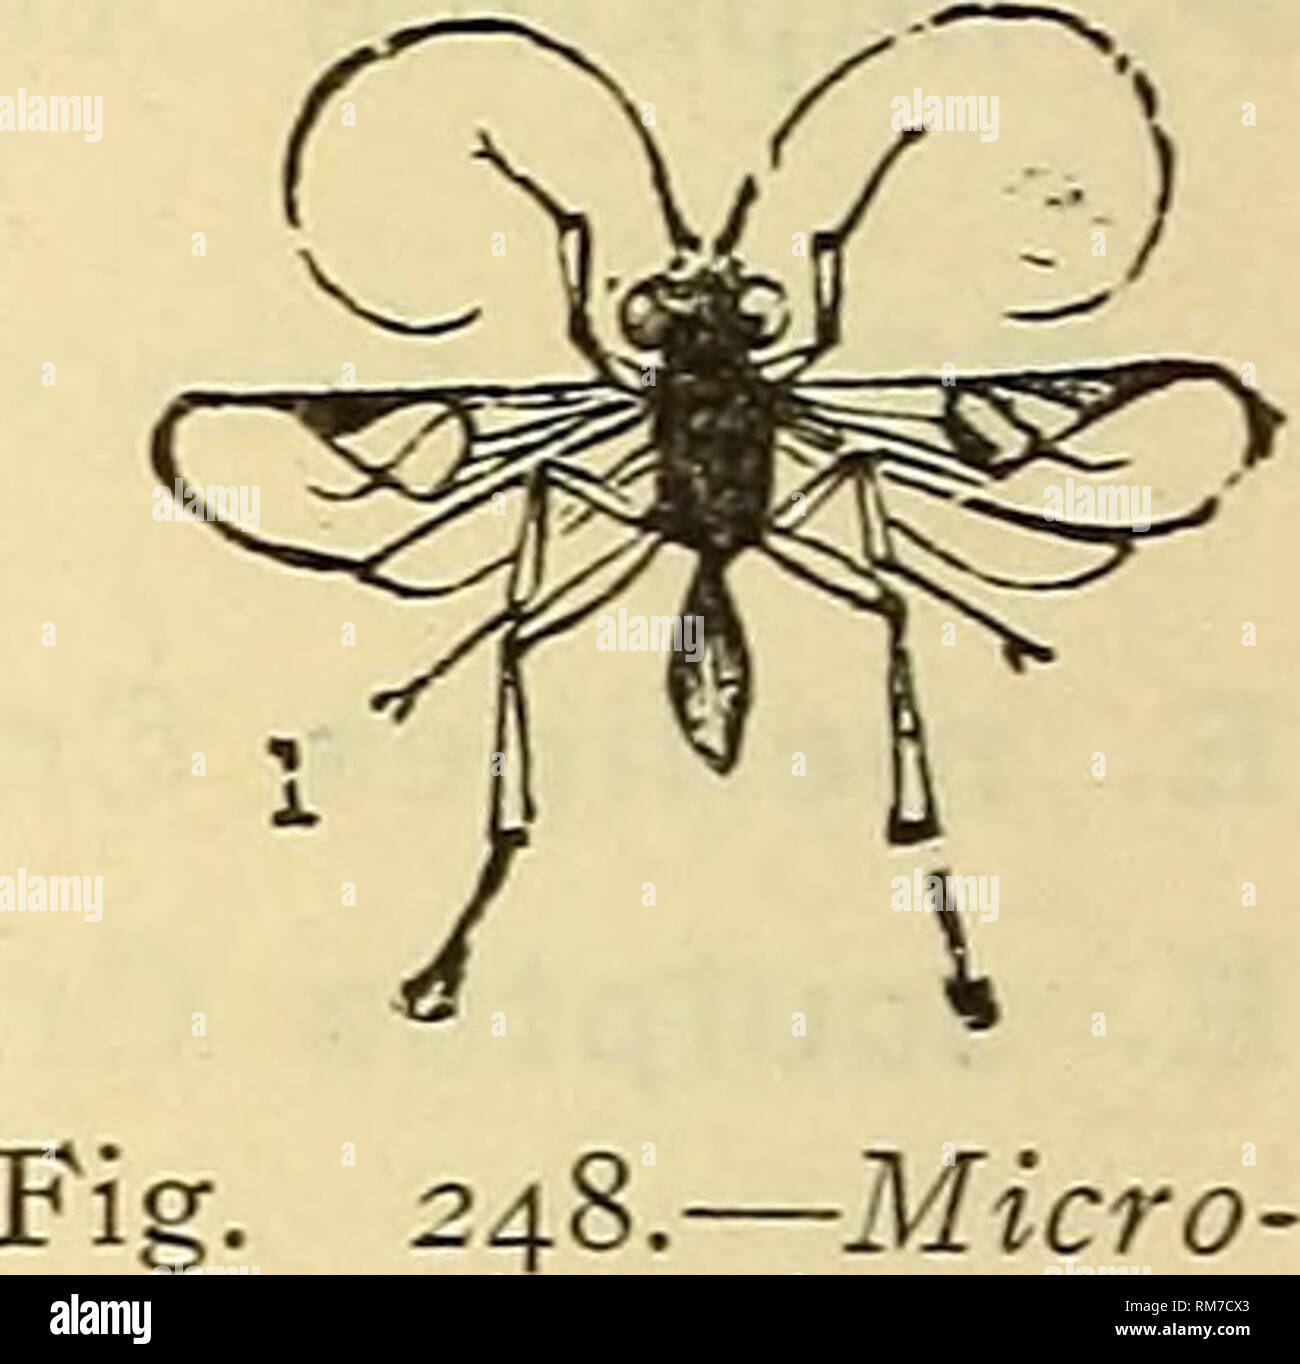 . Annual report, including a report of the insects of New Jersey, 1909. 6io REPORT OF NEW JERSEY STATE MUSEUM.. MICROGASTER Latr. M. carinata Pack. A parasite of the &quot;atalanta&quot; butterfly. M. gelechiae Riley. Woodbury VI, 27 (Jn); reared from &quot;Gelechia gallsesolidaginis,&quot; which is locally common in New Jersey. M. mellipes Say. (Orgilus) Atco VI, 13 (Jn). M. nephoptericis Pack. Parasitic on &quot;Vitula edmandsii.&quot; gaster species. M. maculipennis Cress. Anglesea IX, 9 (Vk). M. zonaria Say. (Hypomicrogaster) New York and probably New Jer- sey (Ashm). rubricoxa Prov. (Hygr Stock Photo